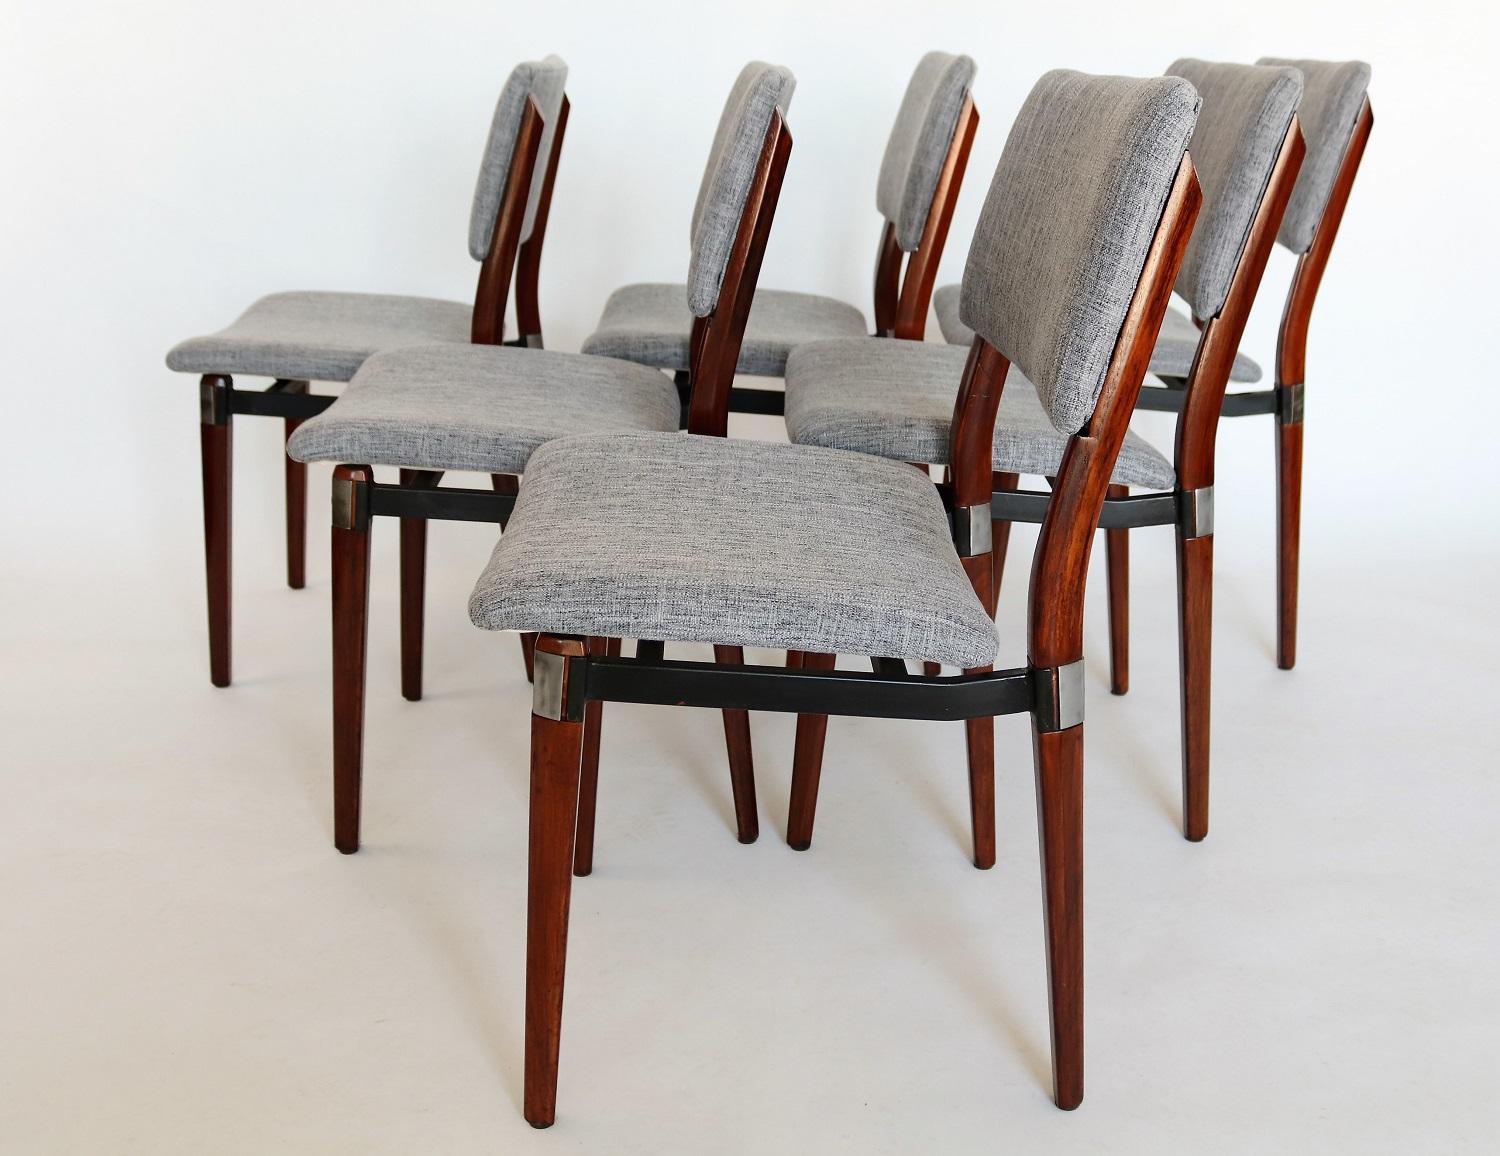 Mid-20th Century Italian Midcentury Dining Chairs by Eugenio Gerli for Tecno Milano, Set of Six